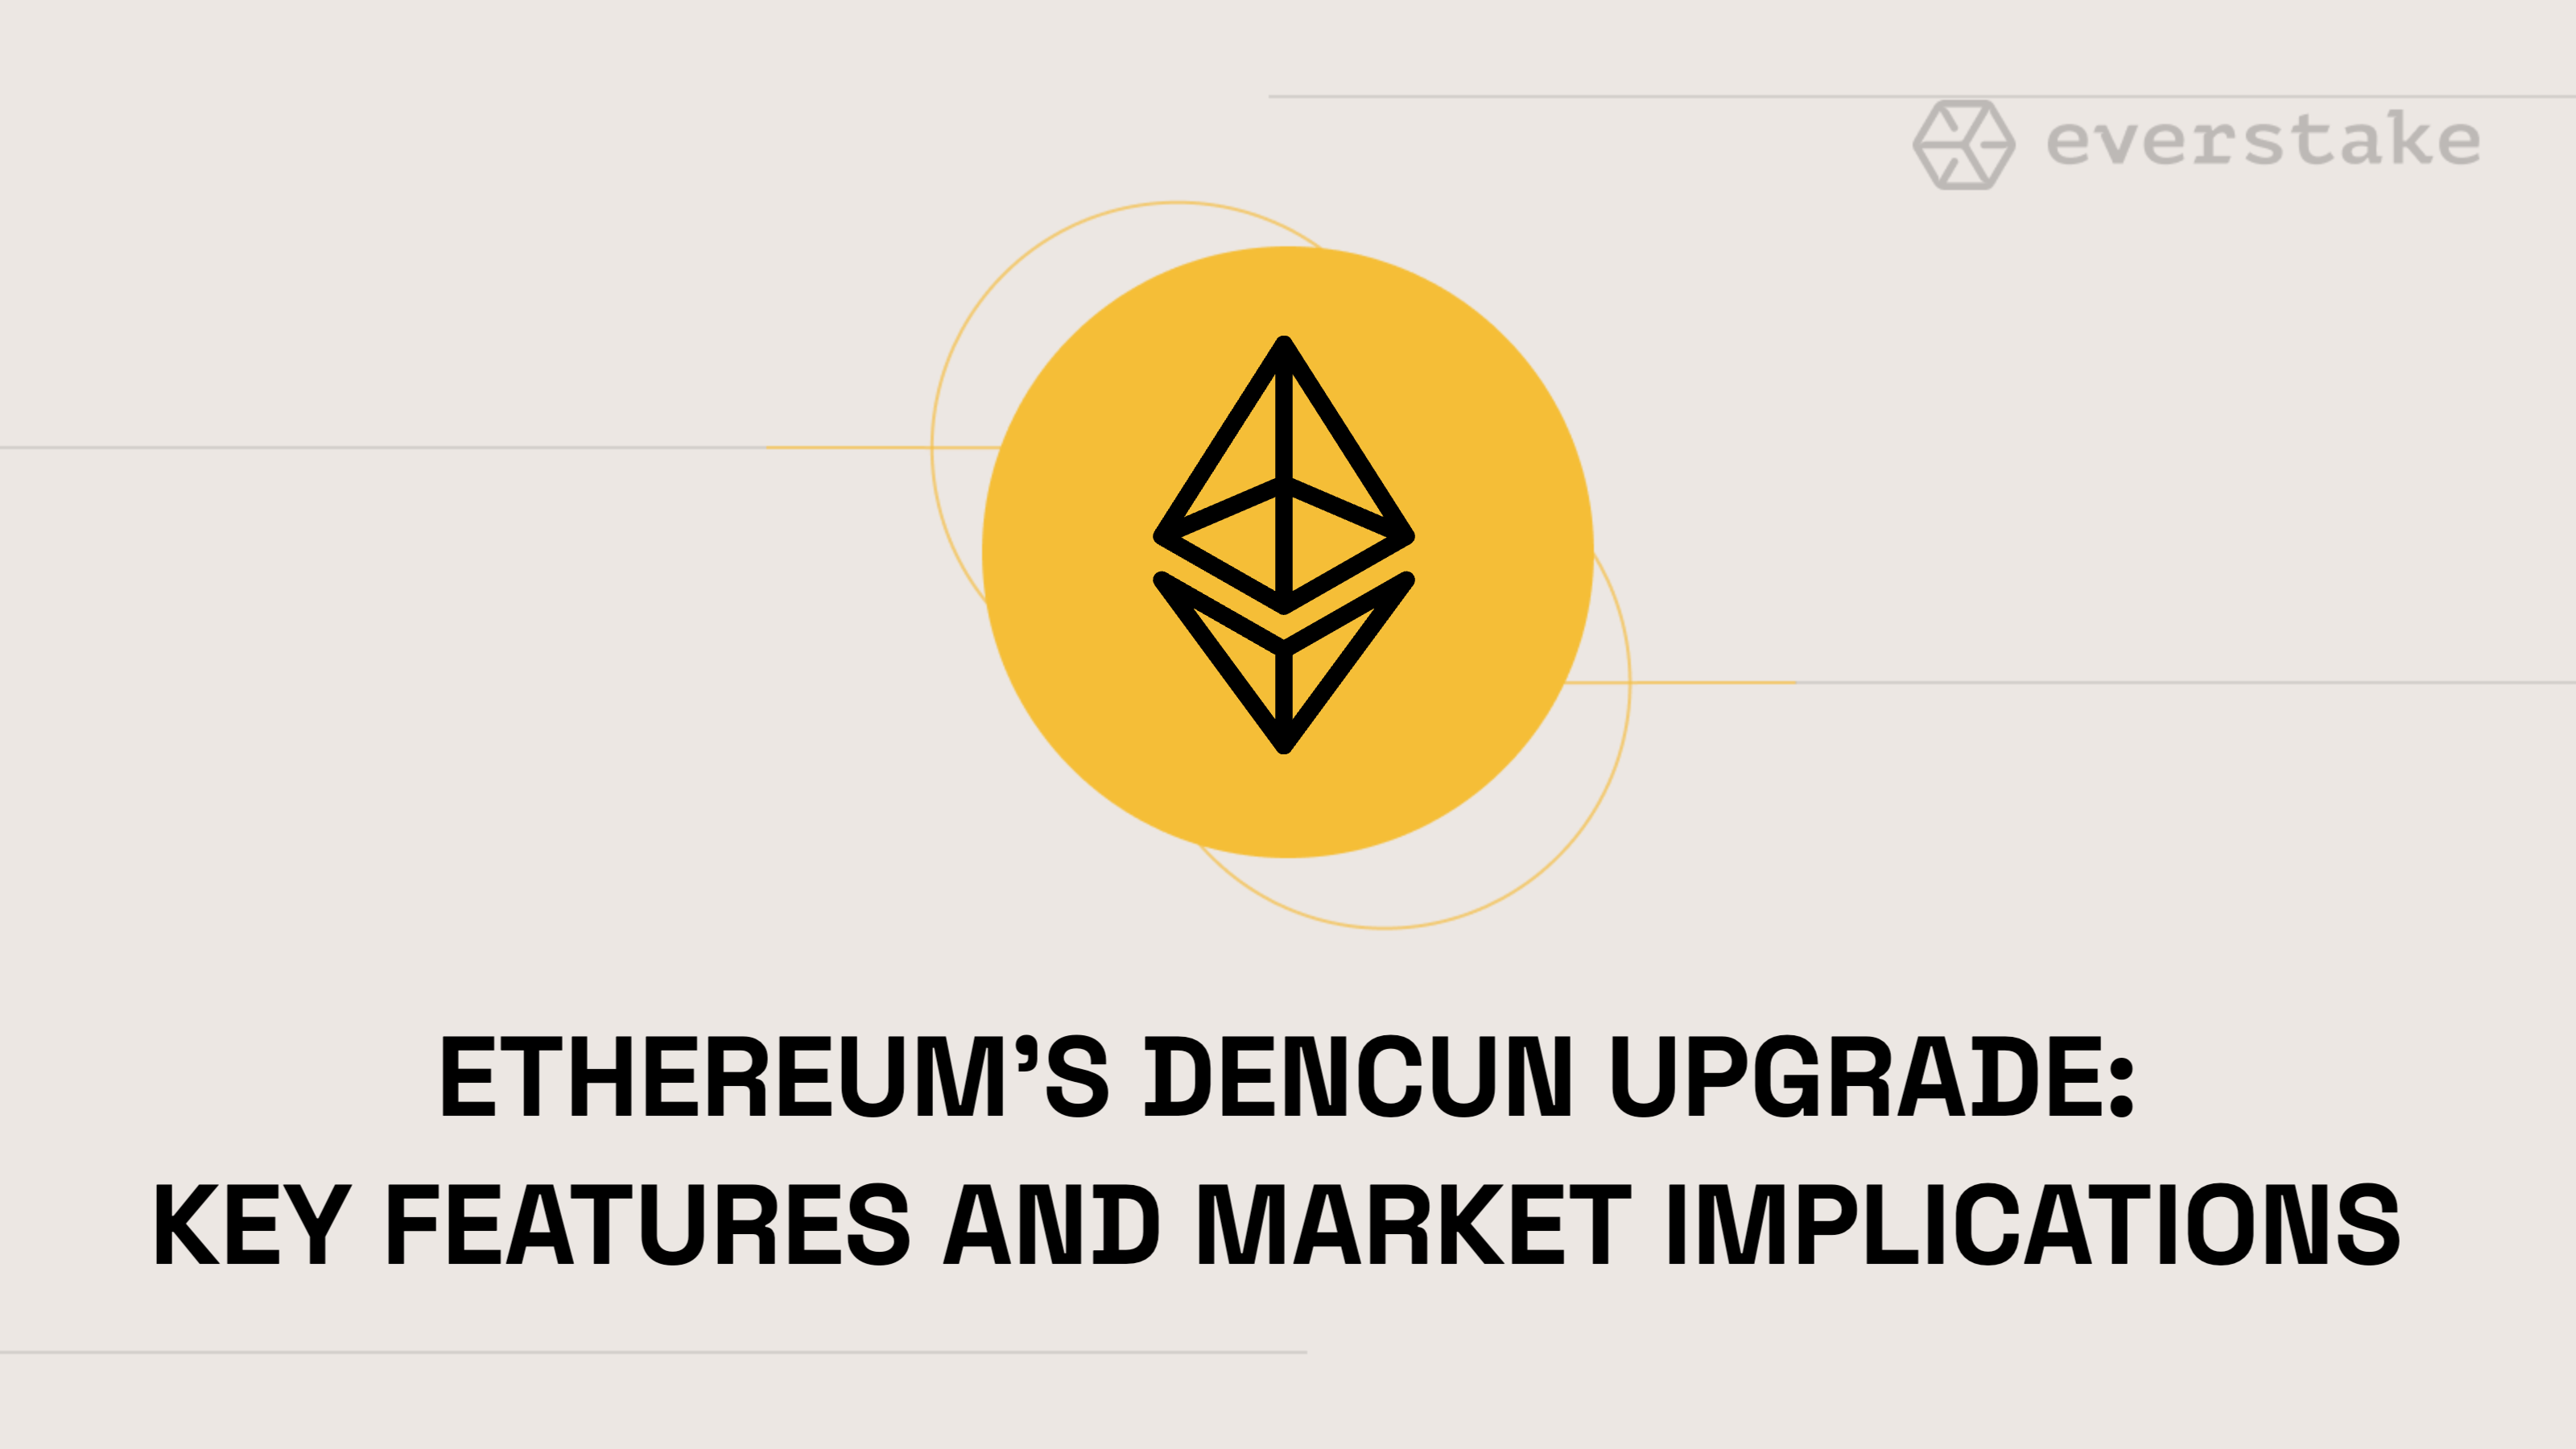 Ethereum's Dencun Upgrade: Key Features and Market Implications